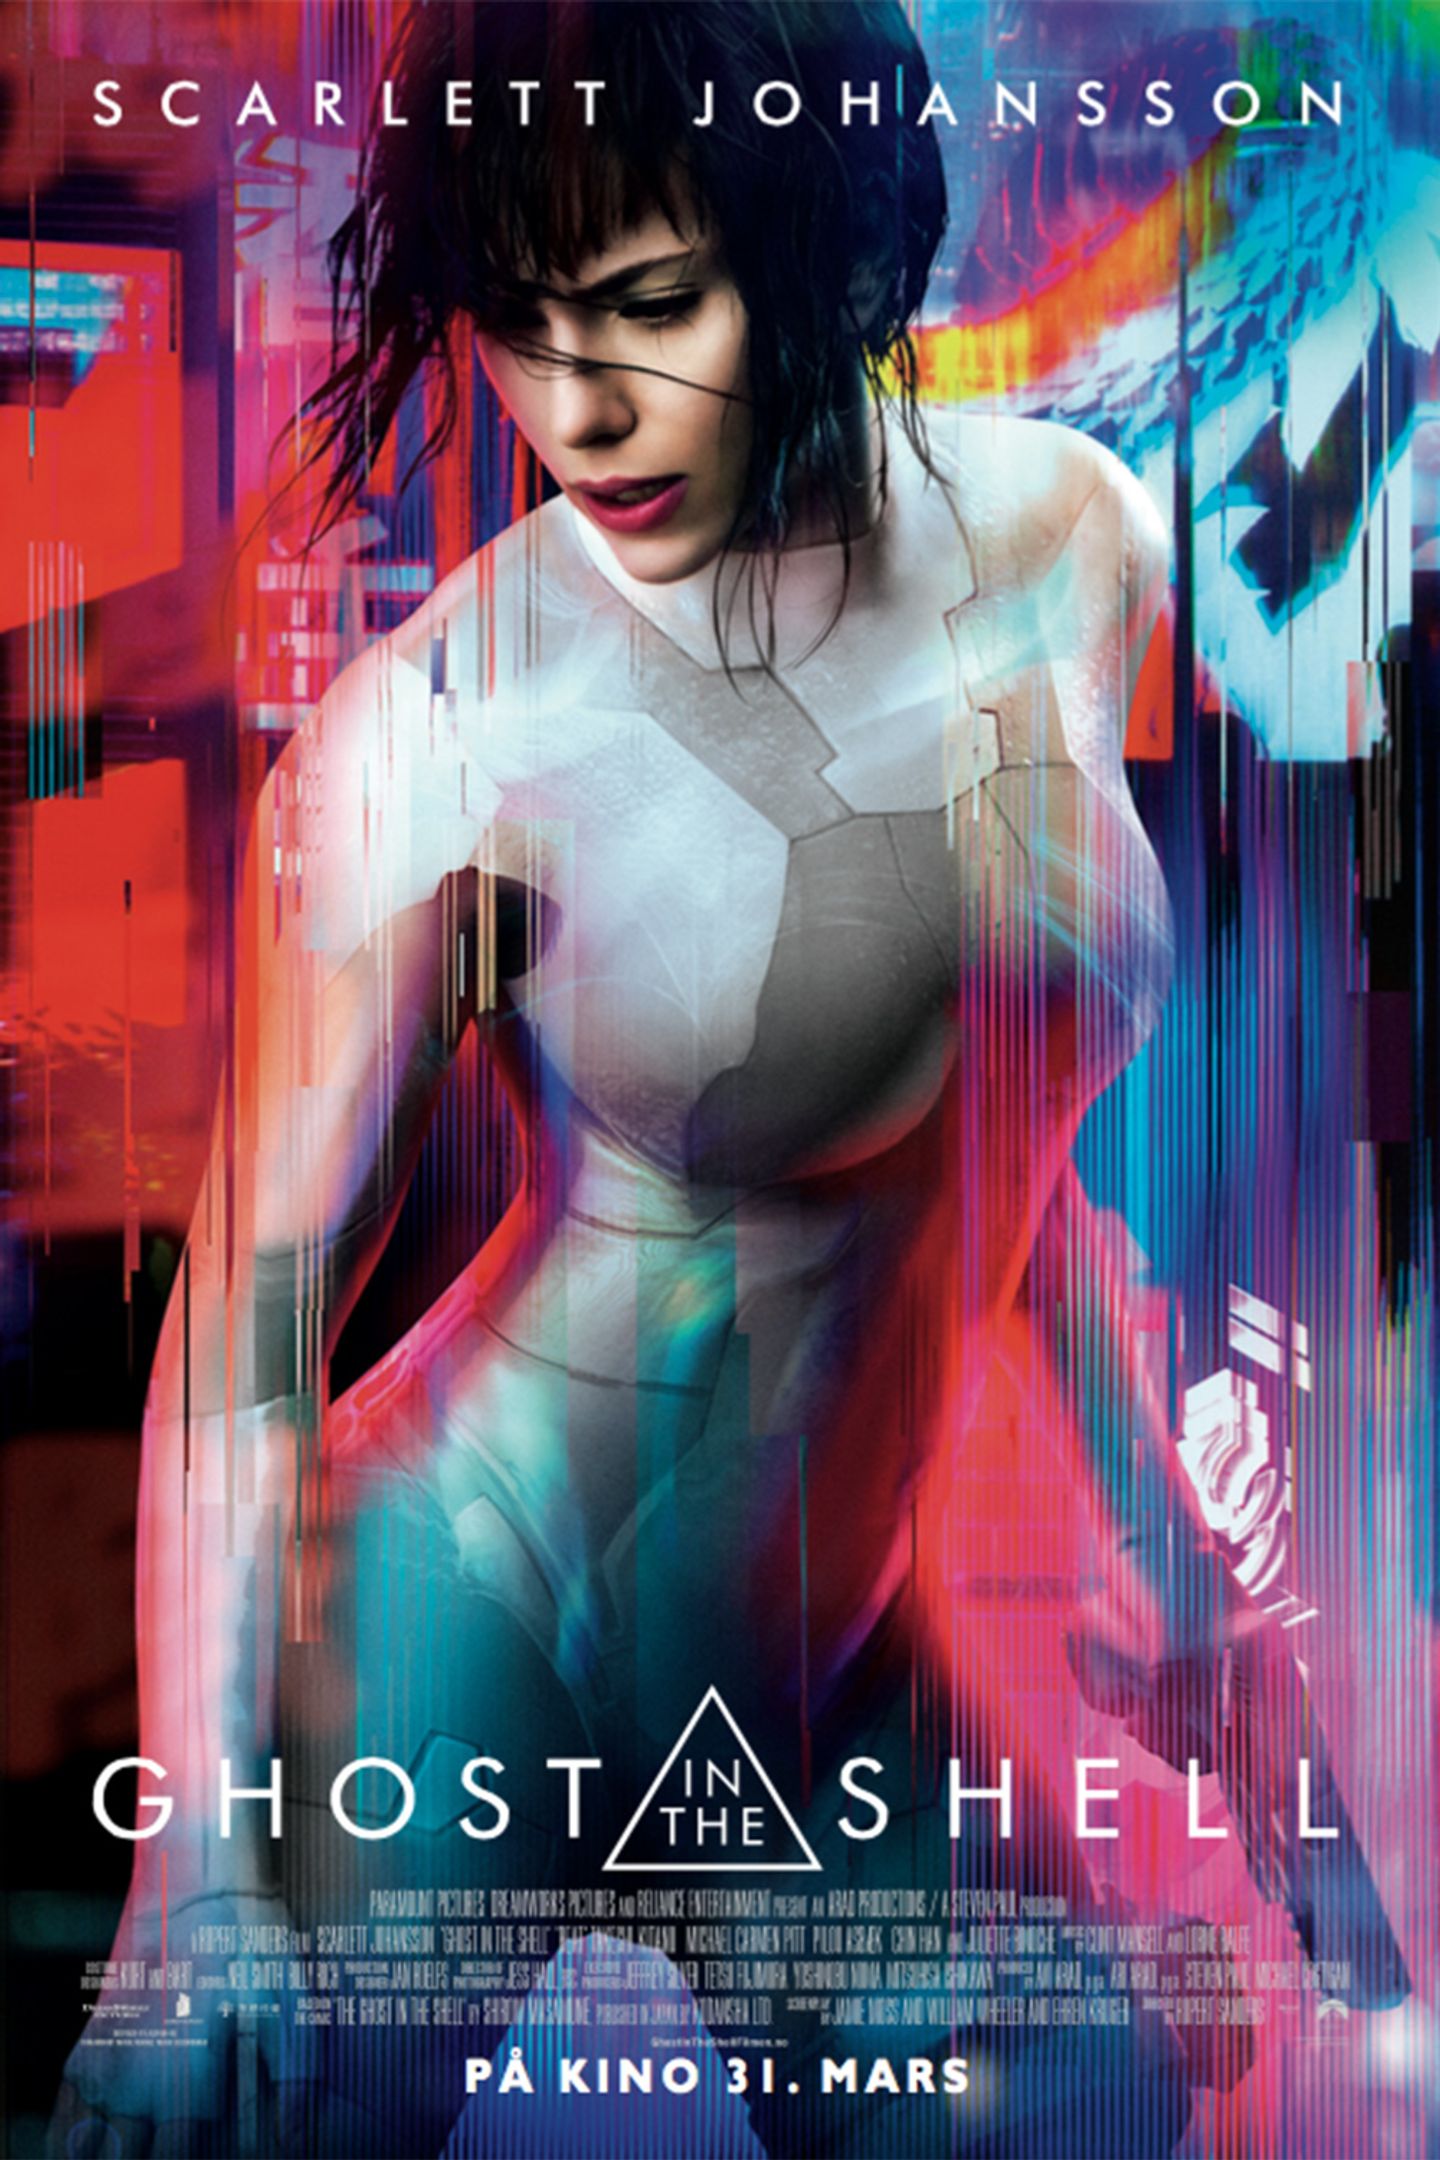 Plakat for 'Ghost in the Shell (3D)'